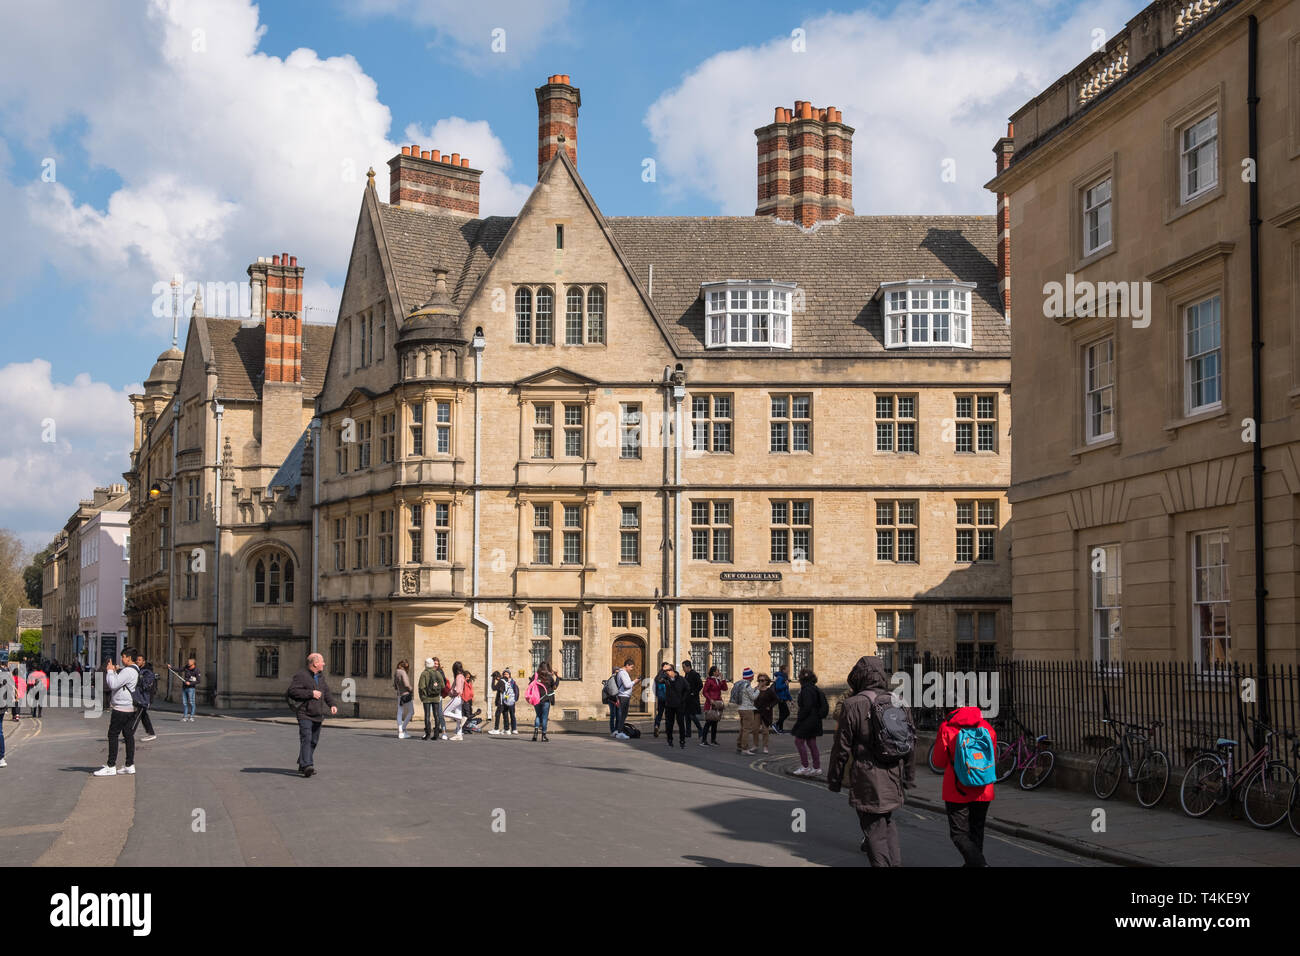 University of Oxford building on New College Lane and joined to Hertford College by Bridge of Sighs, Oxford, UK Stock Photo